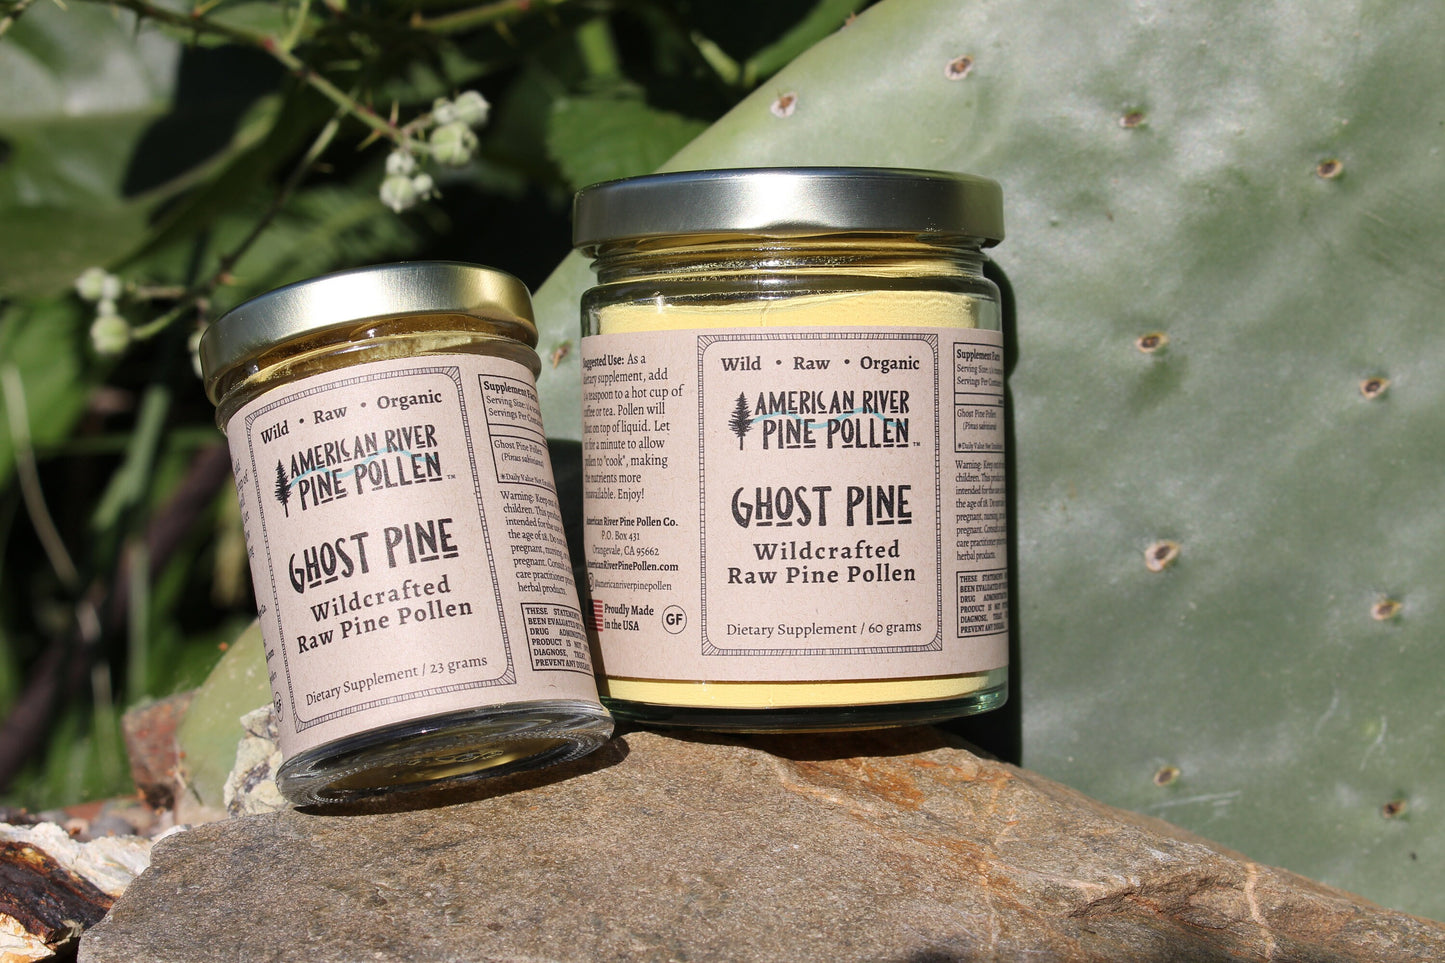 Ghost Pine Pollen - Raw and Wild-Harvested